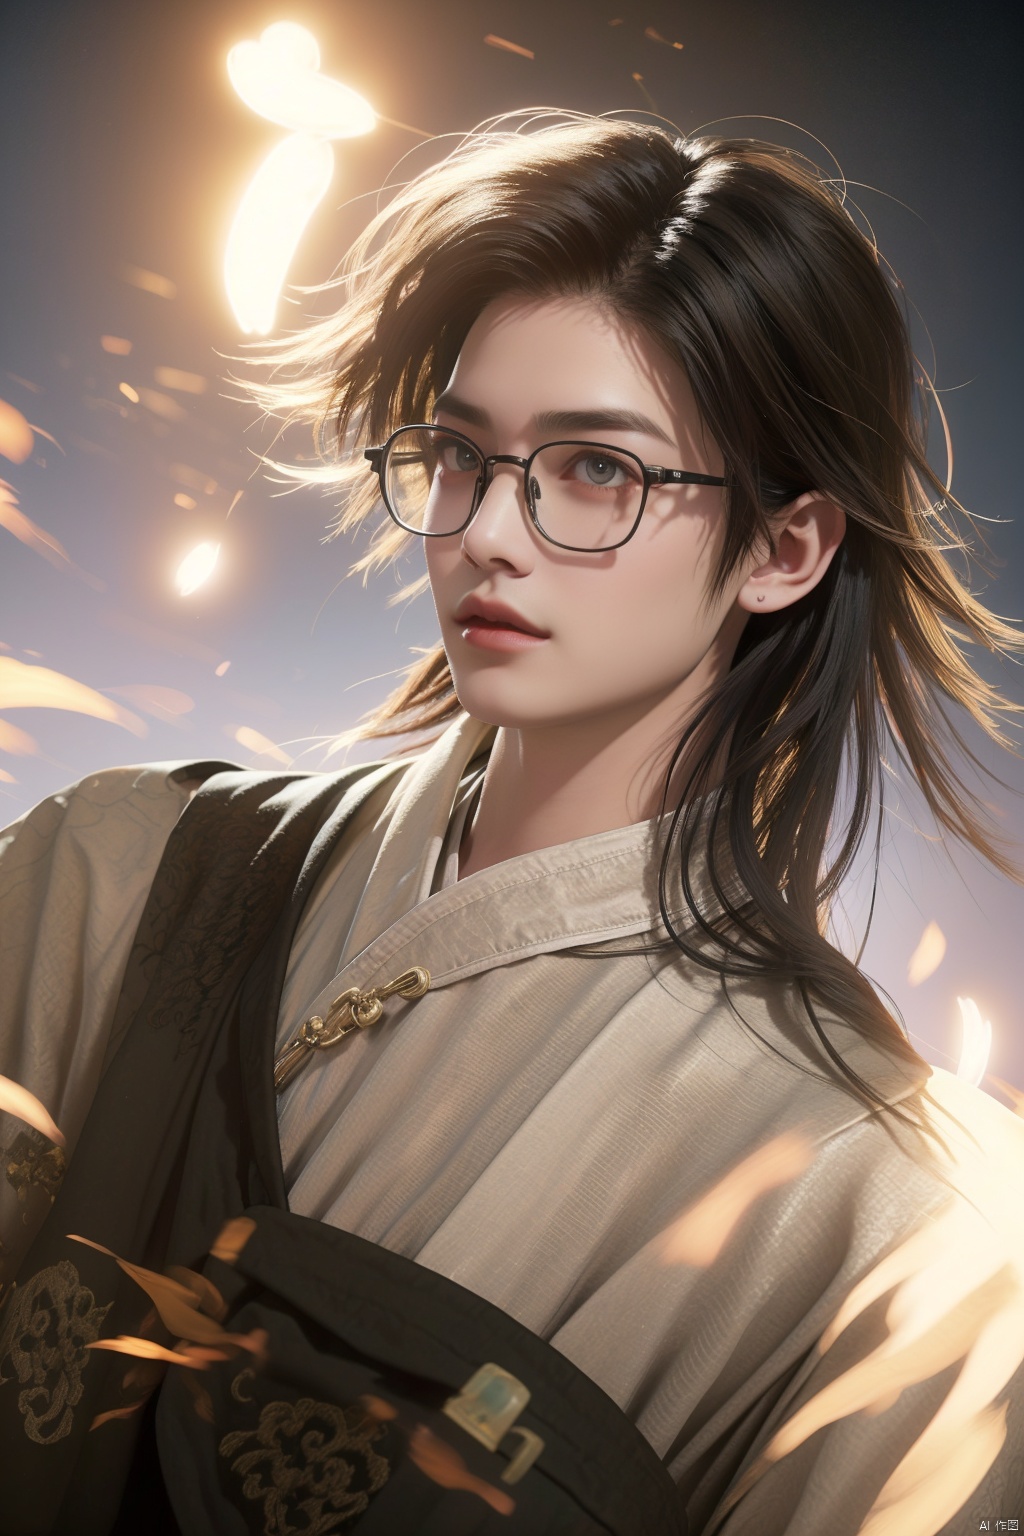  boy ,( glasses:1.4), white hair, long hair and a high nose.Bust photo, China costume, Hanfu, bust photo,Gorgeous clothes, costumes, highlights, white highlights,Outdoor, fan, danjue, fx